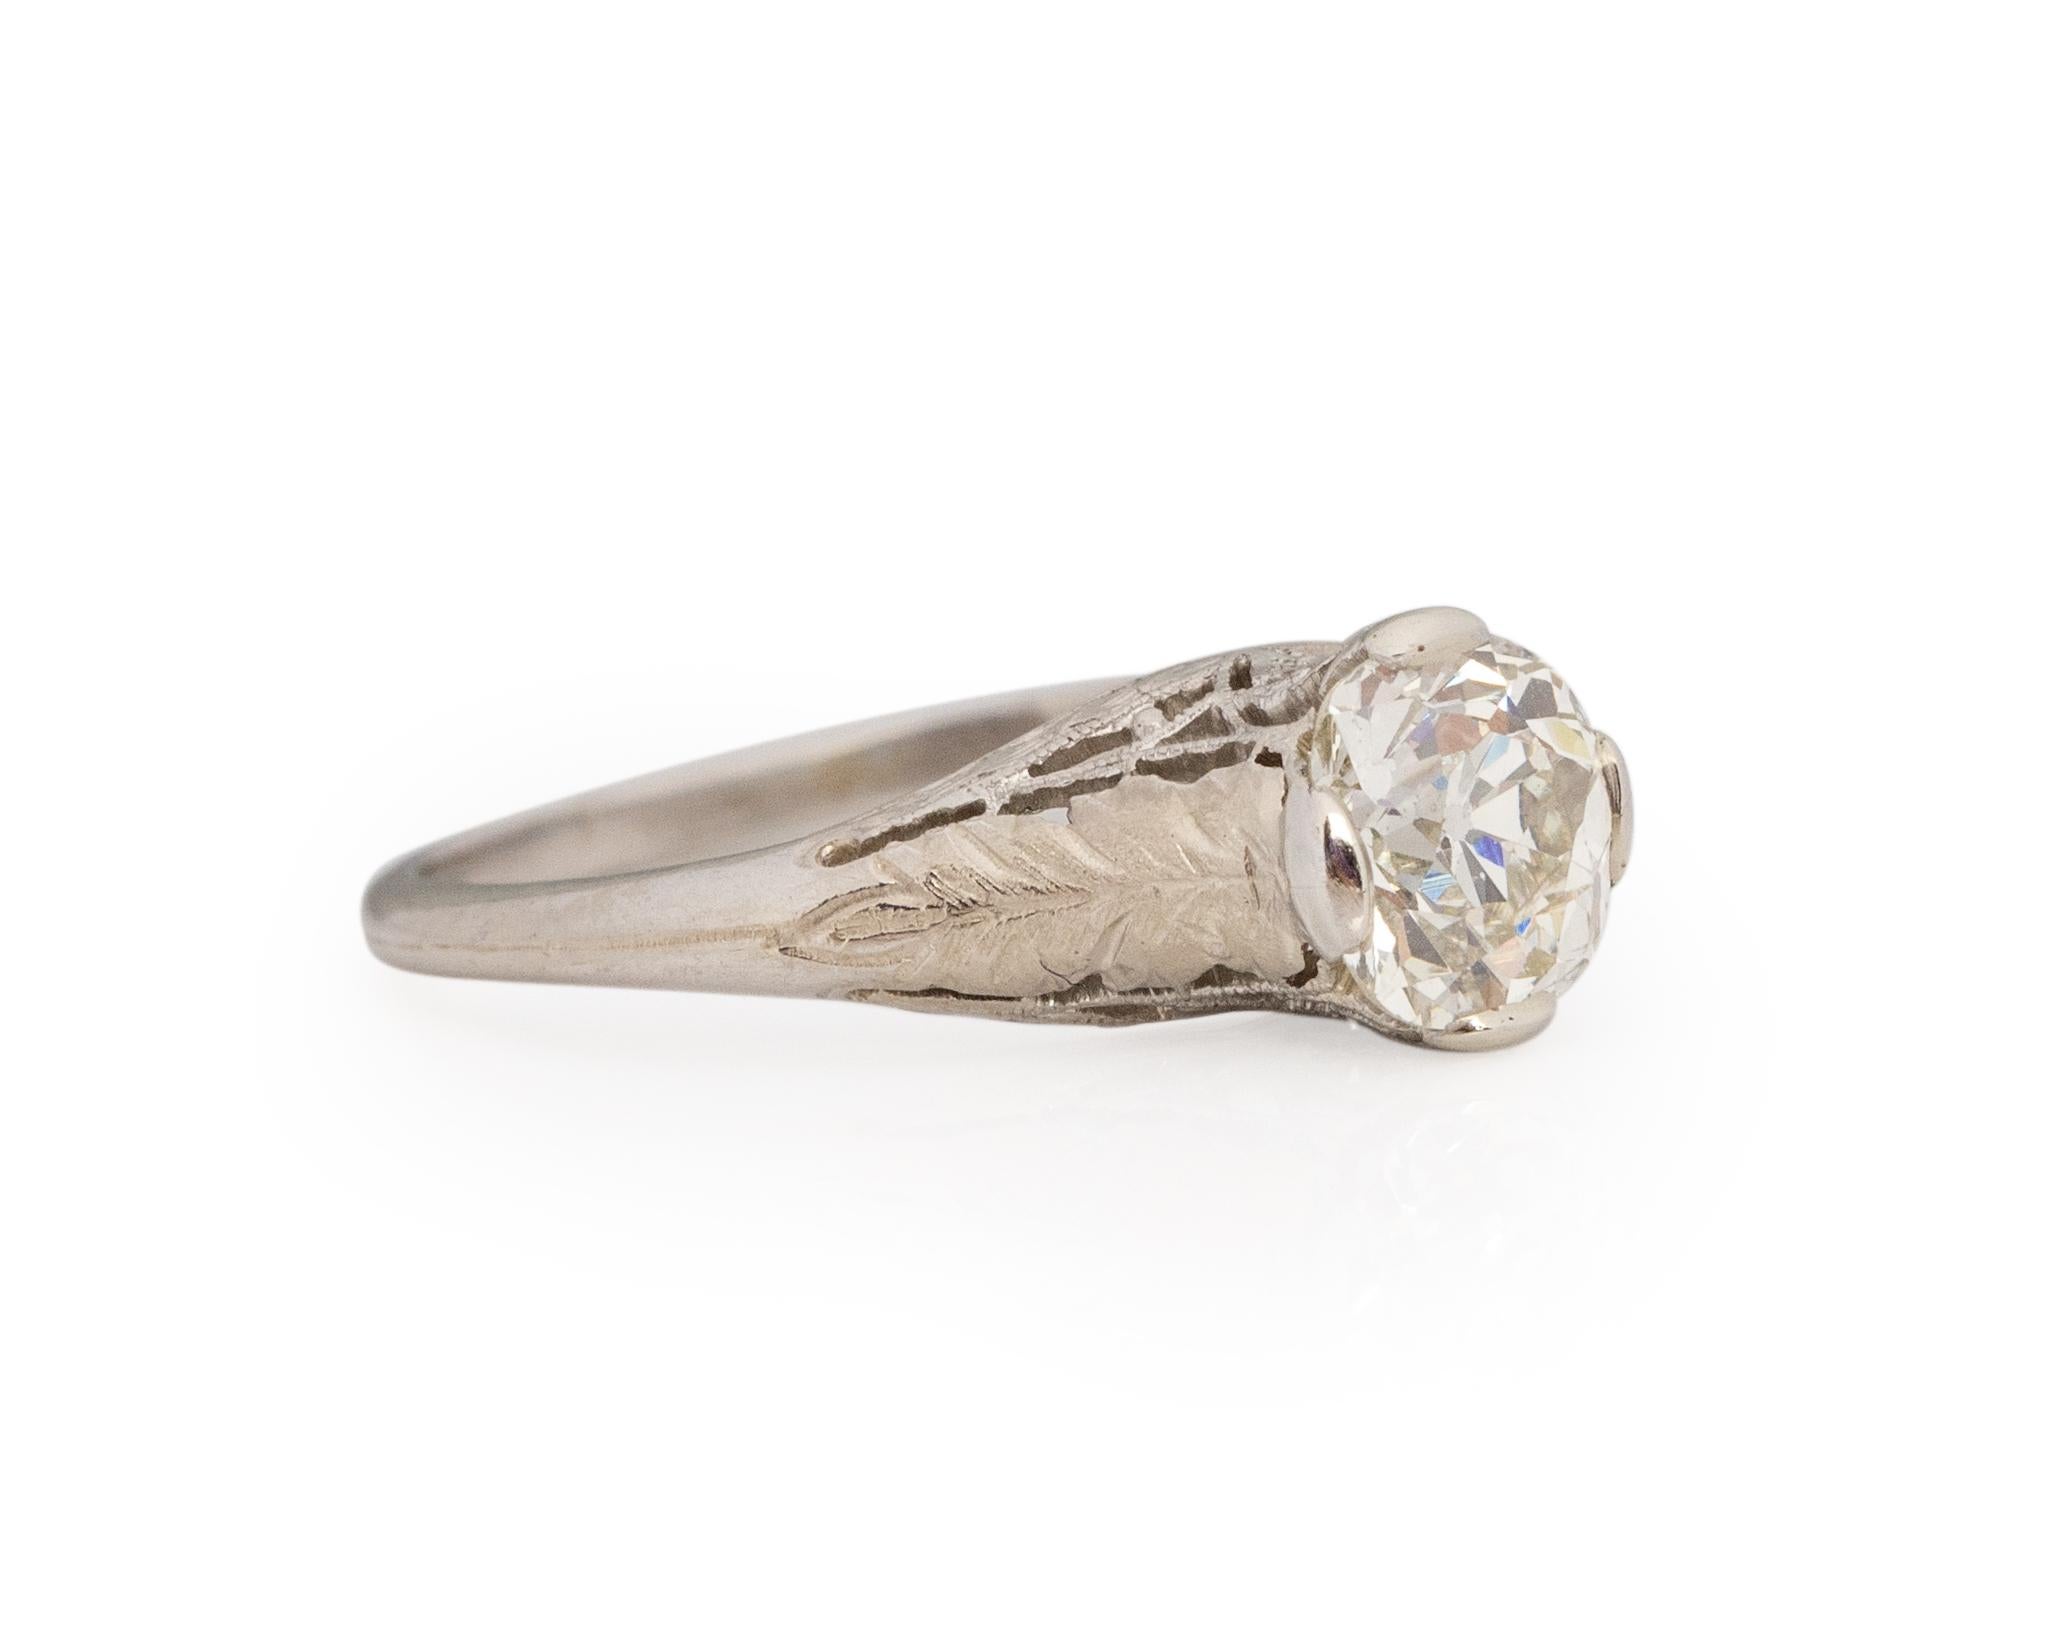 Ring Size: 6.25
Metal Type: Platinum [Hallmarked, and Tested]
Weight: 3.4 grams

Center Diamond Details:
GIA REPORT #: 1216780785
Weight: 1.13carat
Cut: Antique Cushion
Color: M
Clarity: SI1
Measurements: 6.53mm x 6.09 x 4.20mm

Finger to Top of